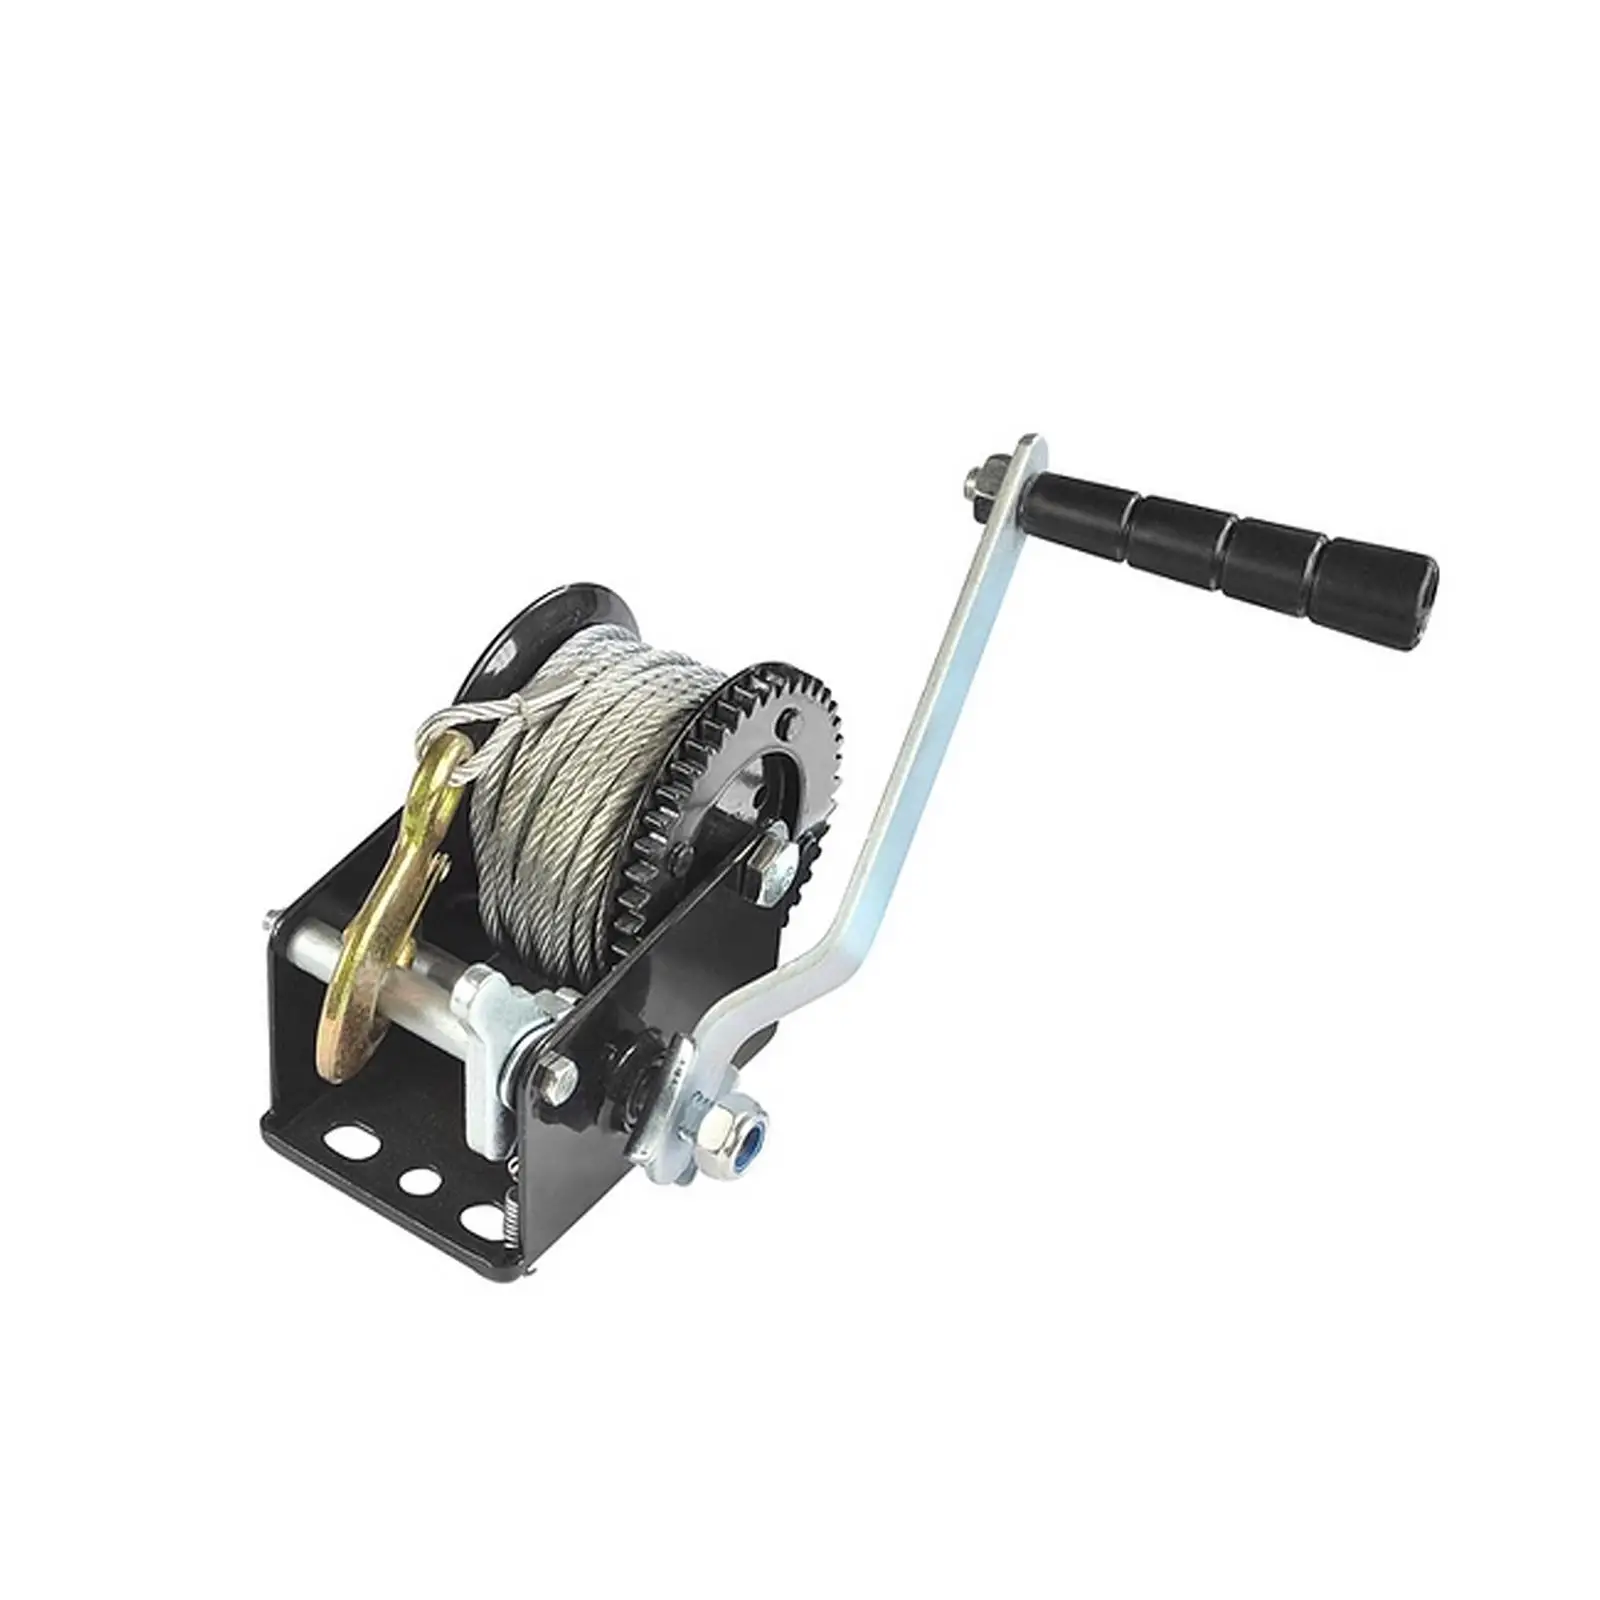 Manual Hand Winch 800lbs Fittings Durable Cable Trailer Winch for Motorhomes